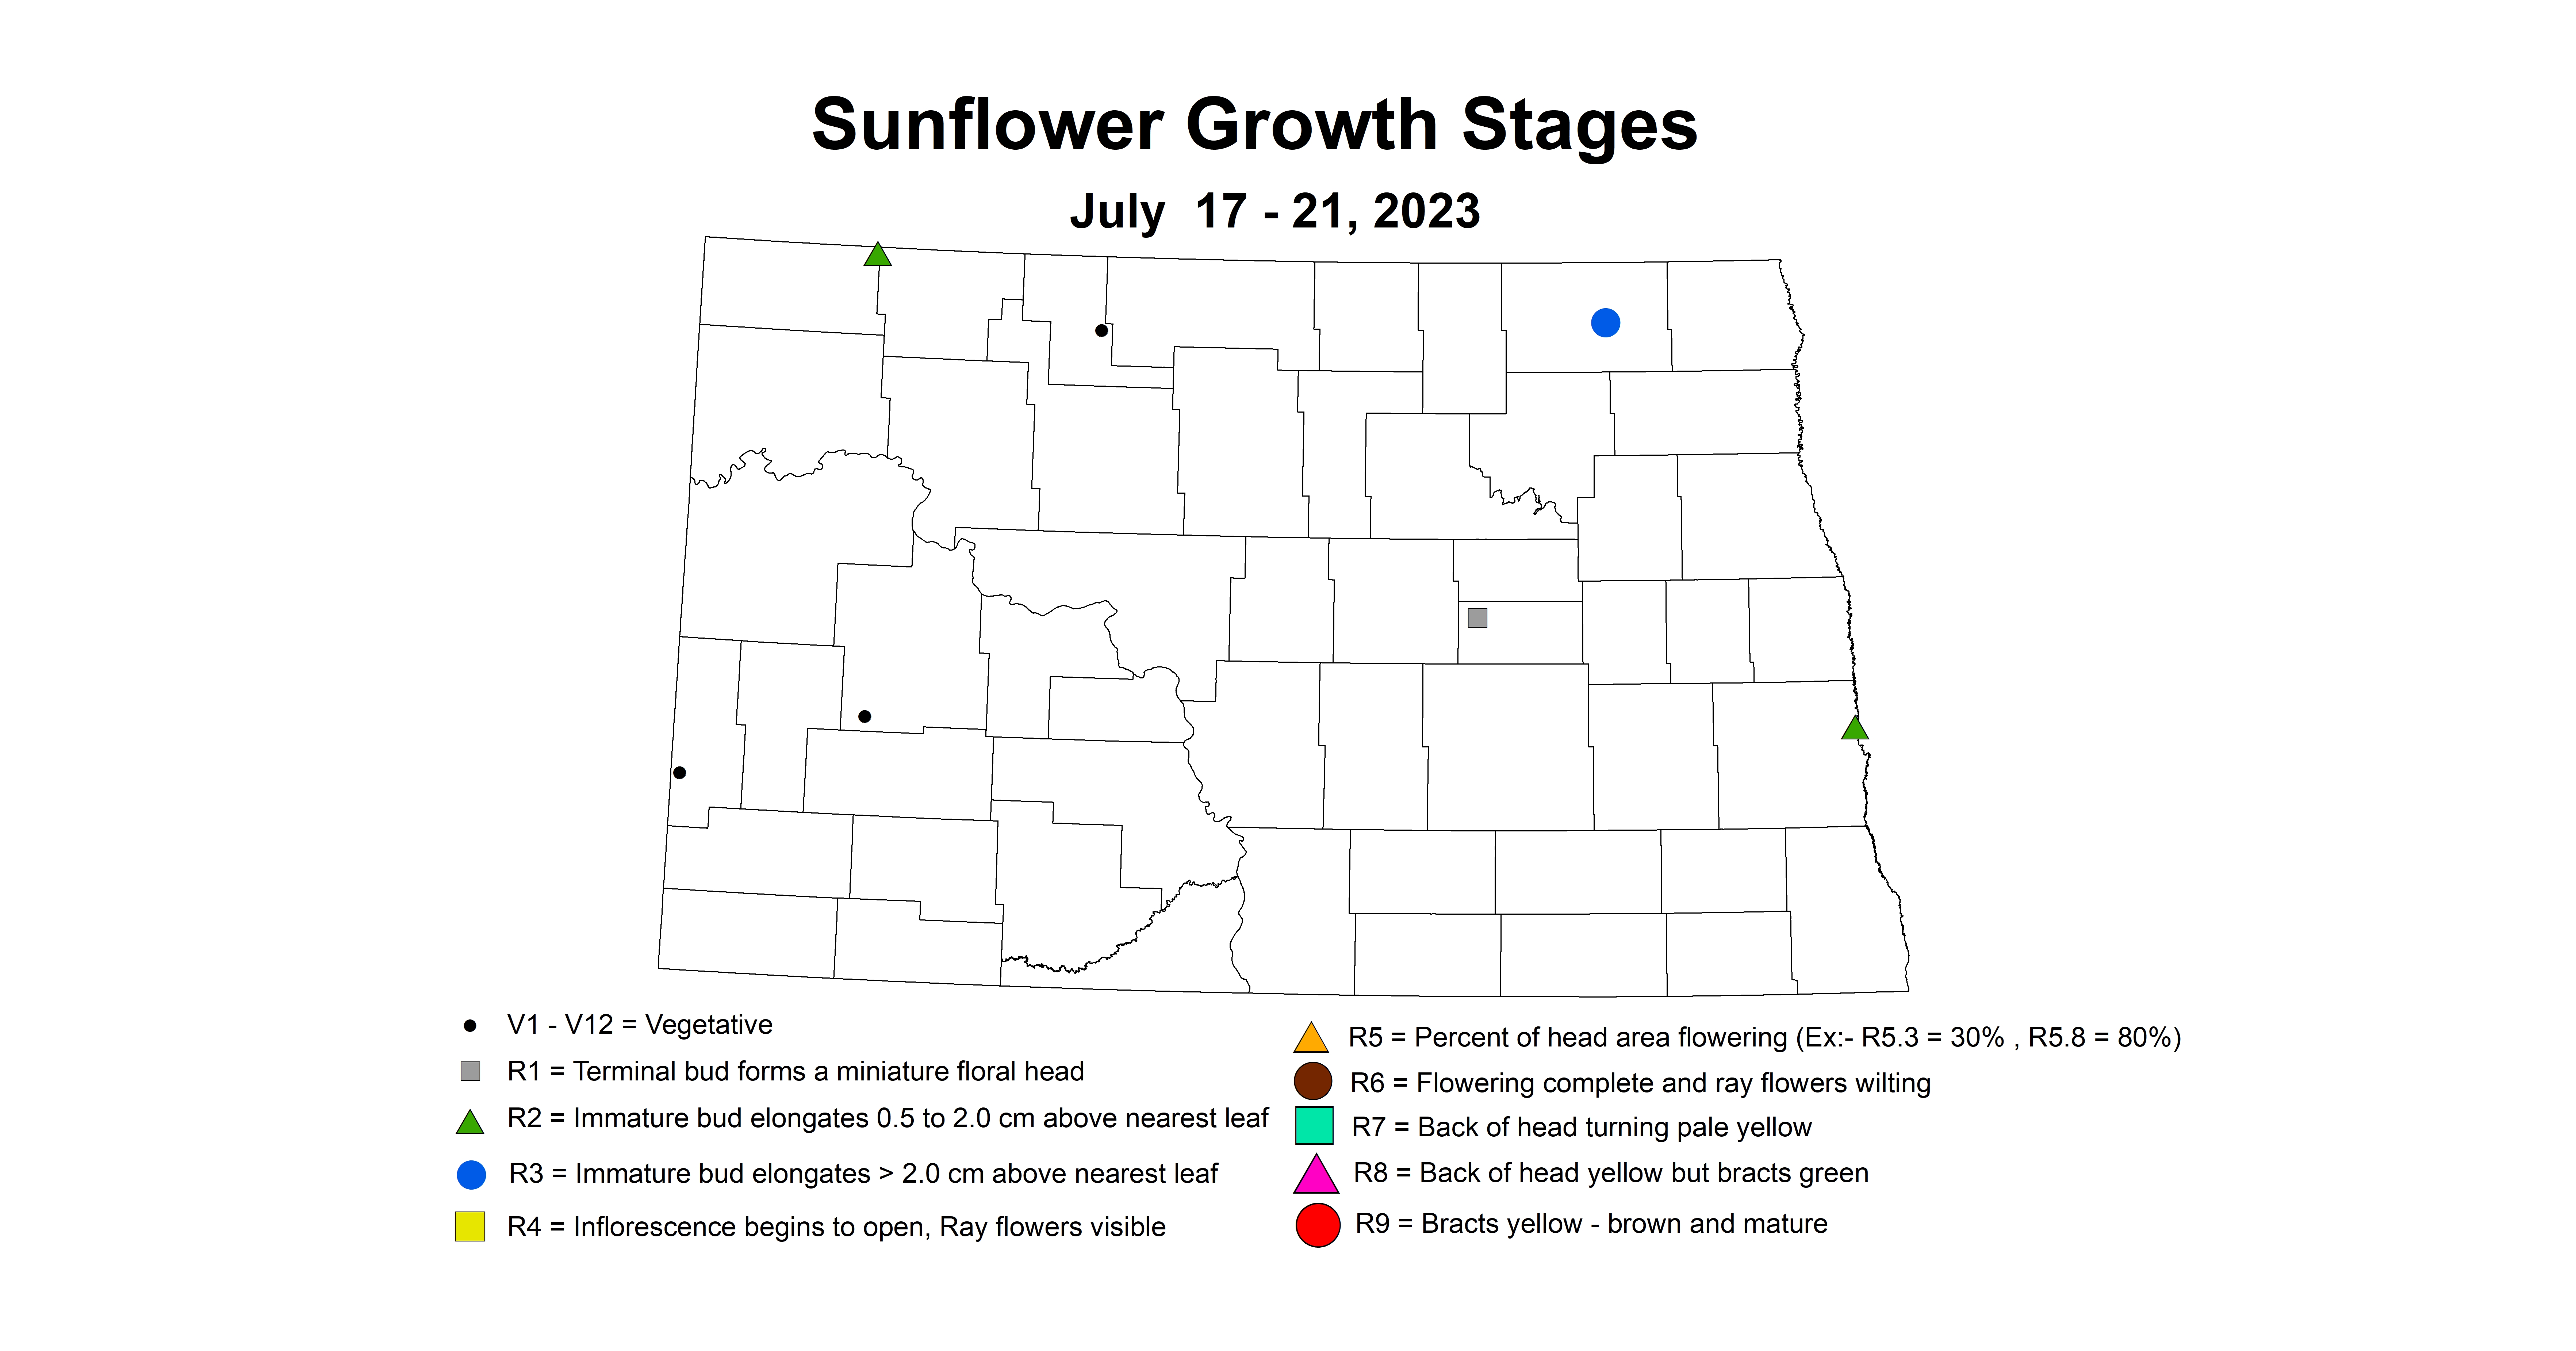 sunflower growth stages insecttrap July 17-21 2023